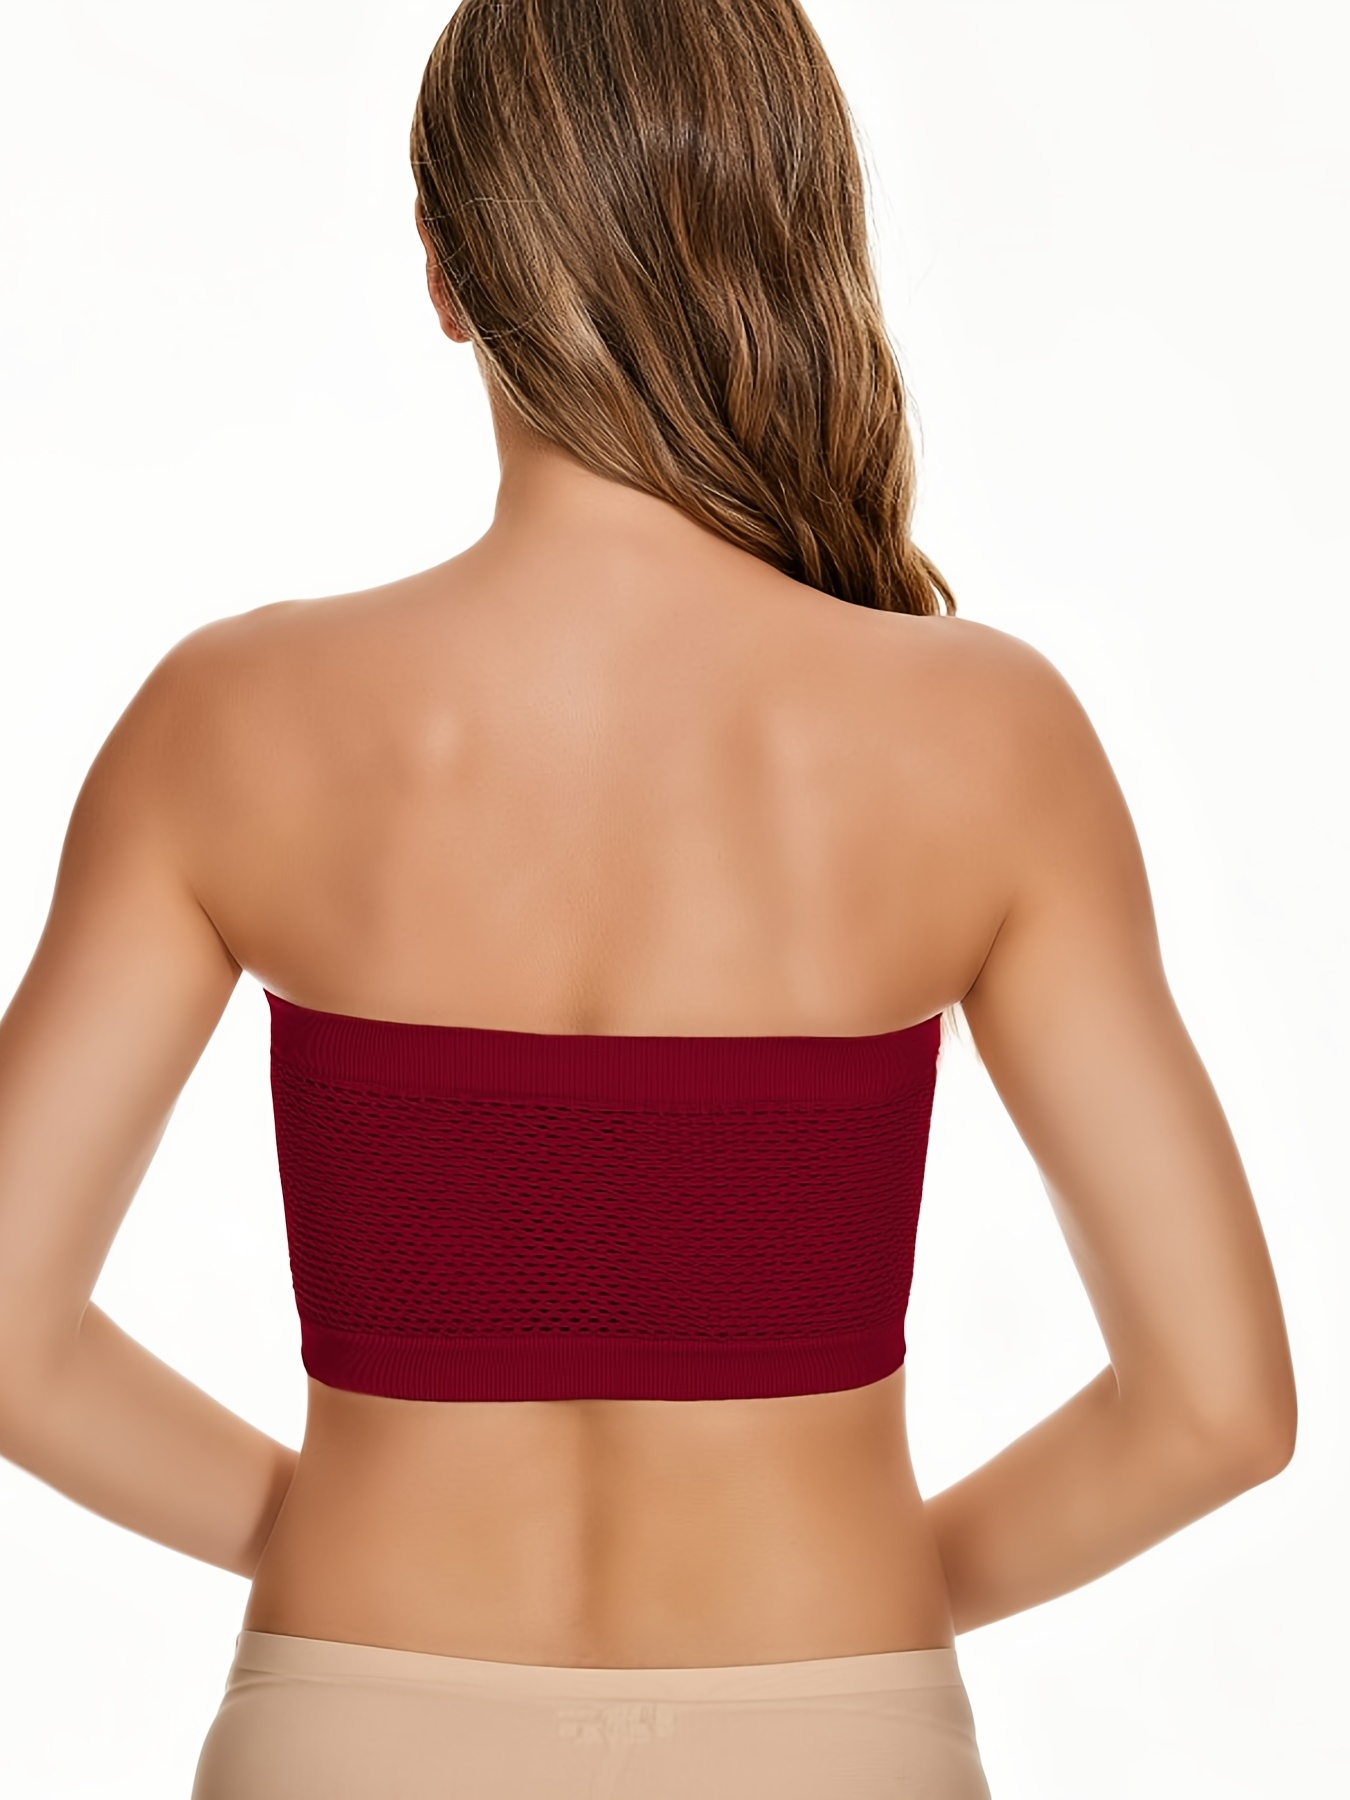 Stretchy Strapless Push Up Bras, Seamless Bralettes Stretchy Non Padded  Bandeau Tube Top Bra for Women